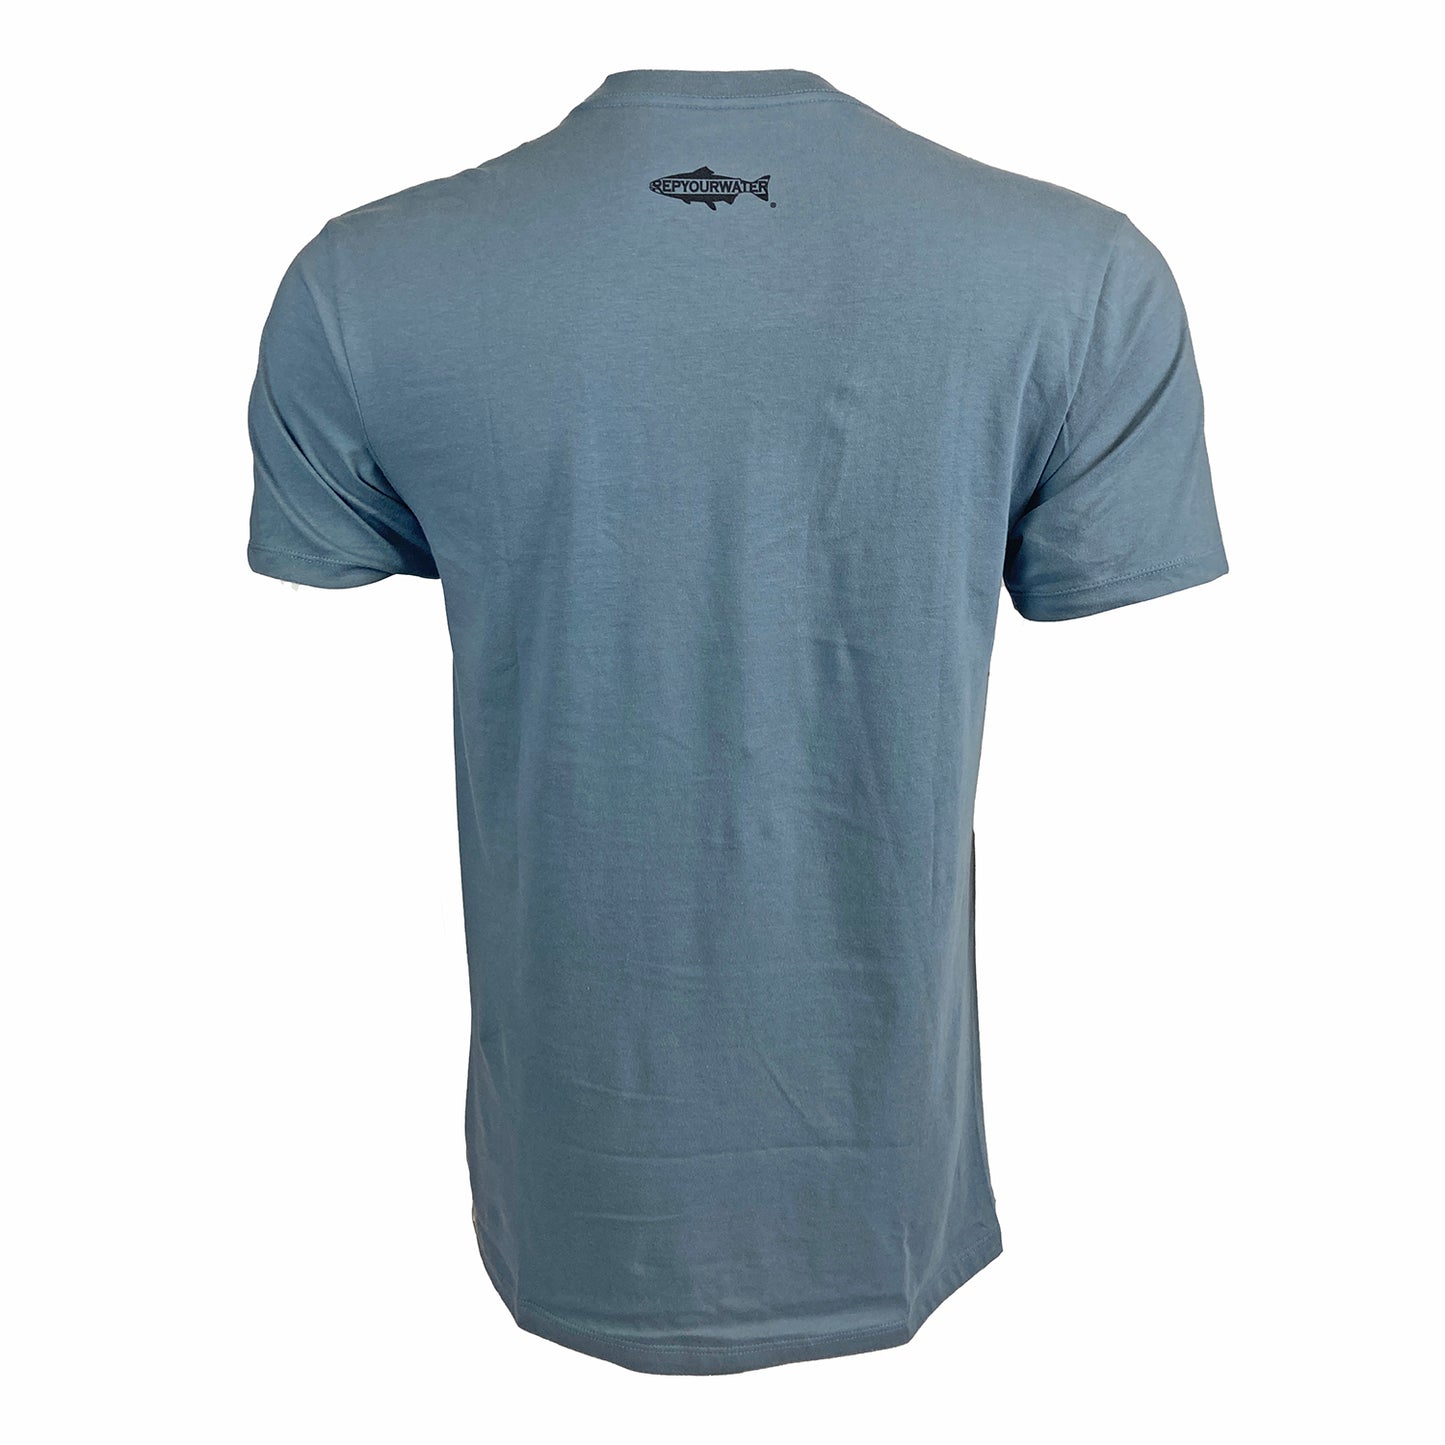 Blue tee shown from the back with Rep Your Water logo just below the neck line.